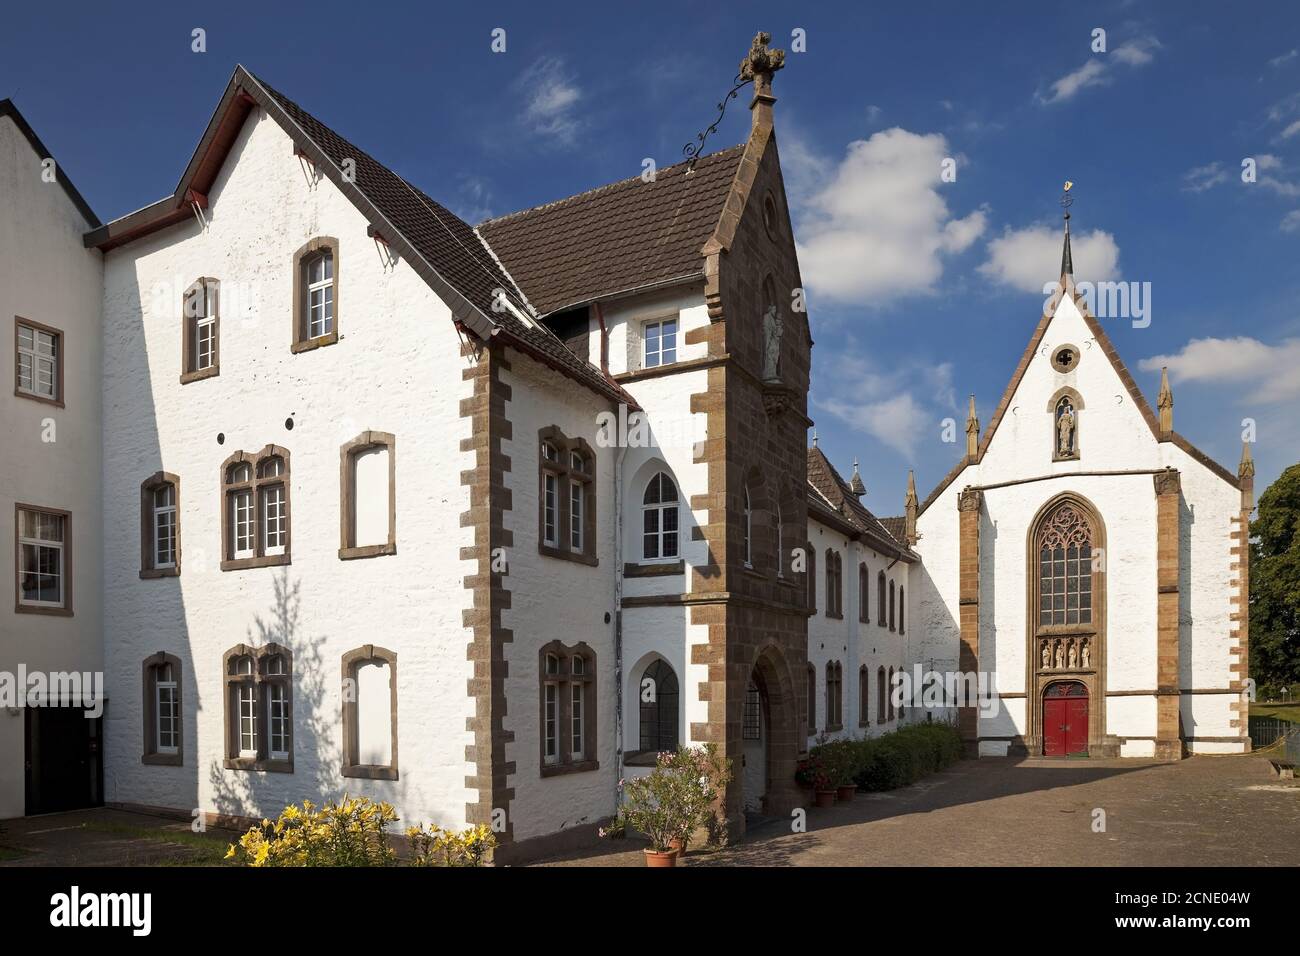 Mariawald Abbey, the only male Trappist monastery in Germany was closed in 2018, Heimbach, Germany Stock Photo